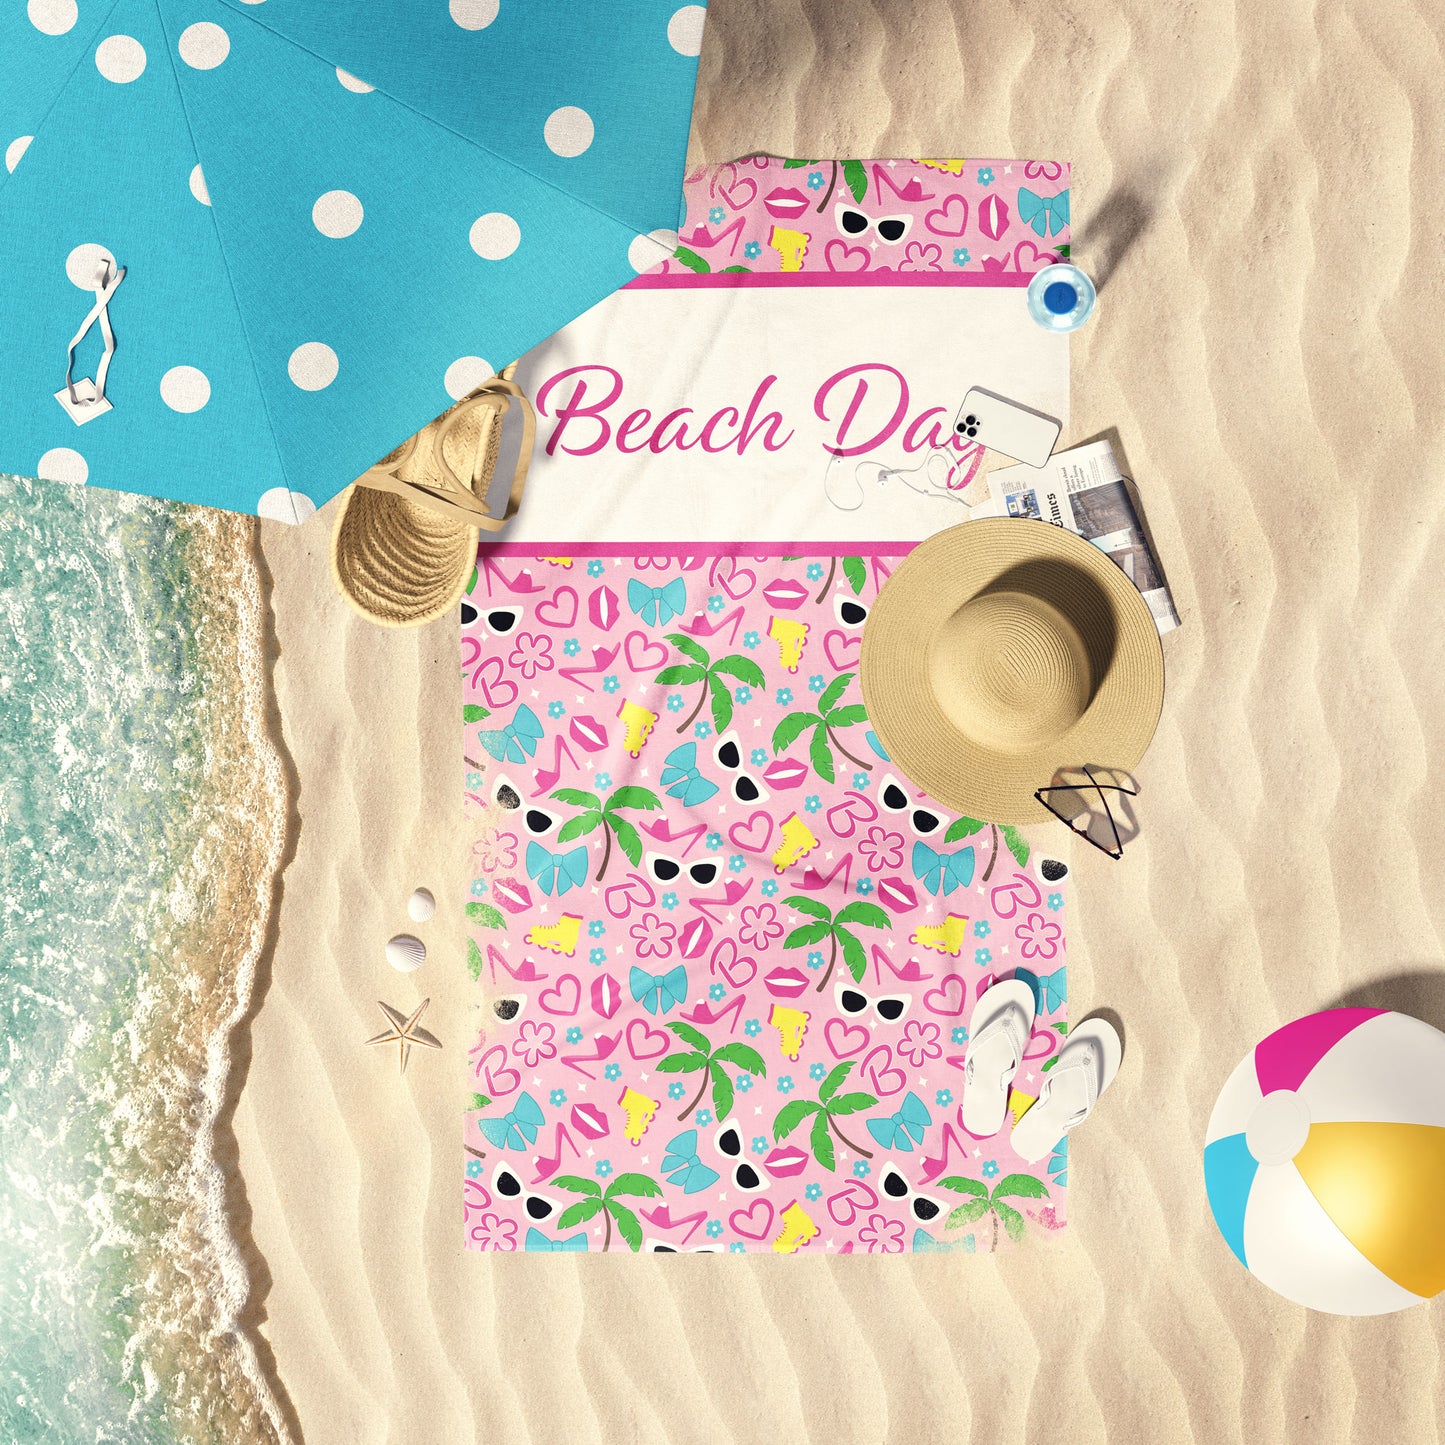 Hot pink and pink summer dressup print beach towel laid out by the water at the beach.